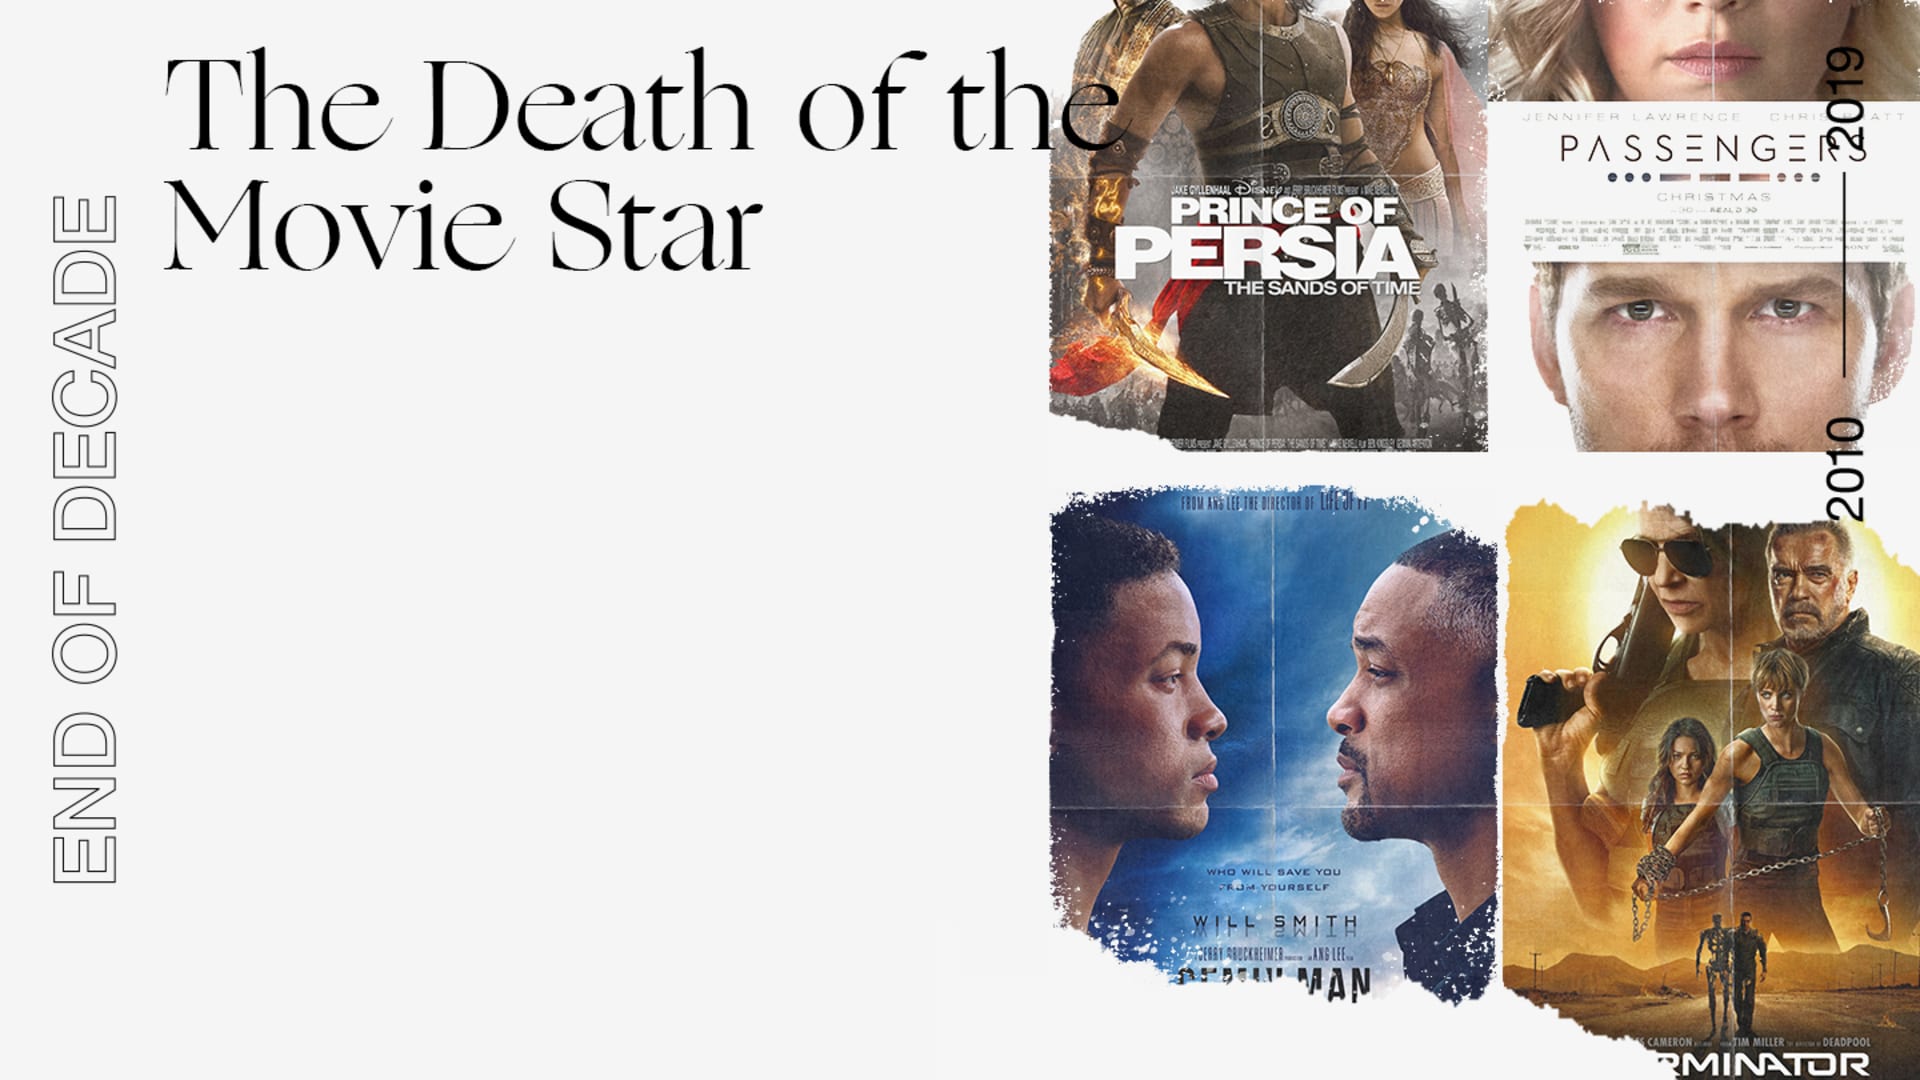 The Death of the Movie Star